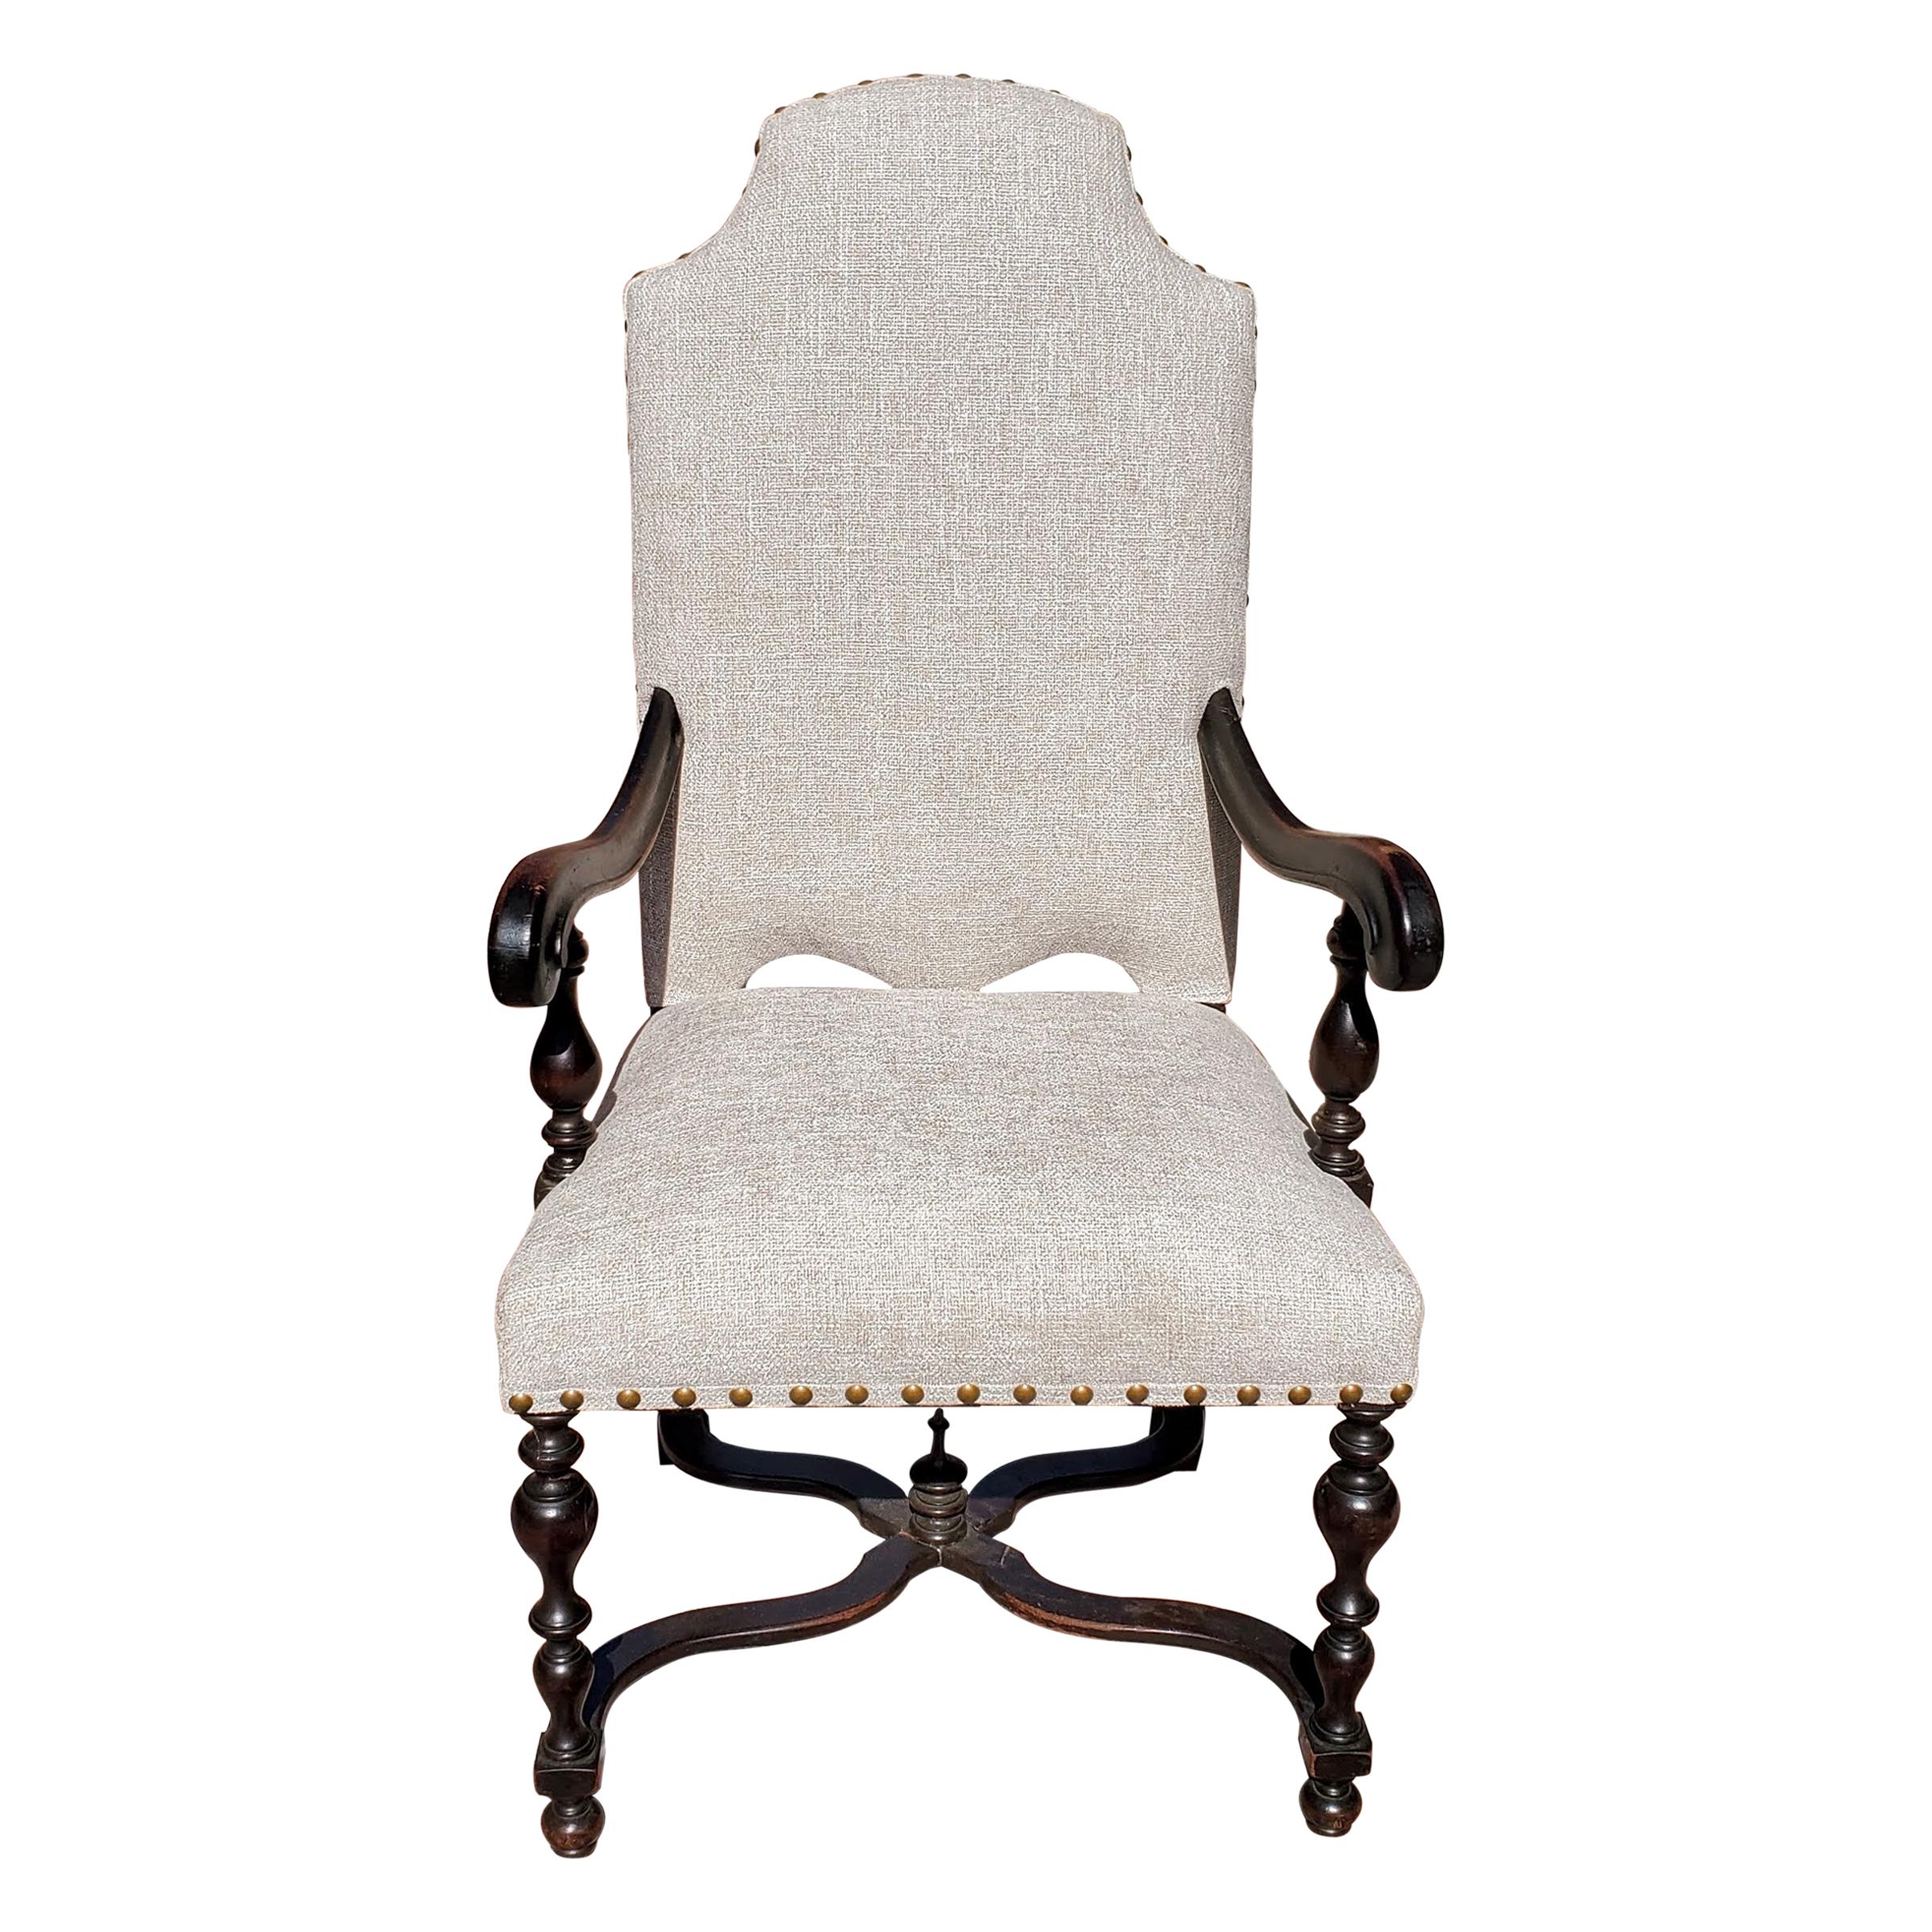 19th Century Baroque Style Walnut Armchair Upholstered in Taupe Chenille Fabric